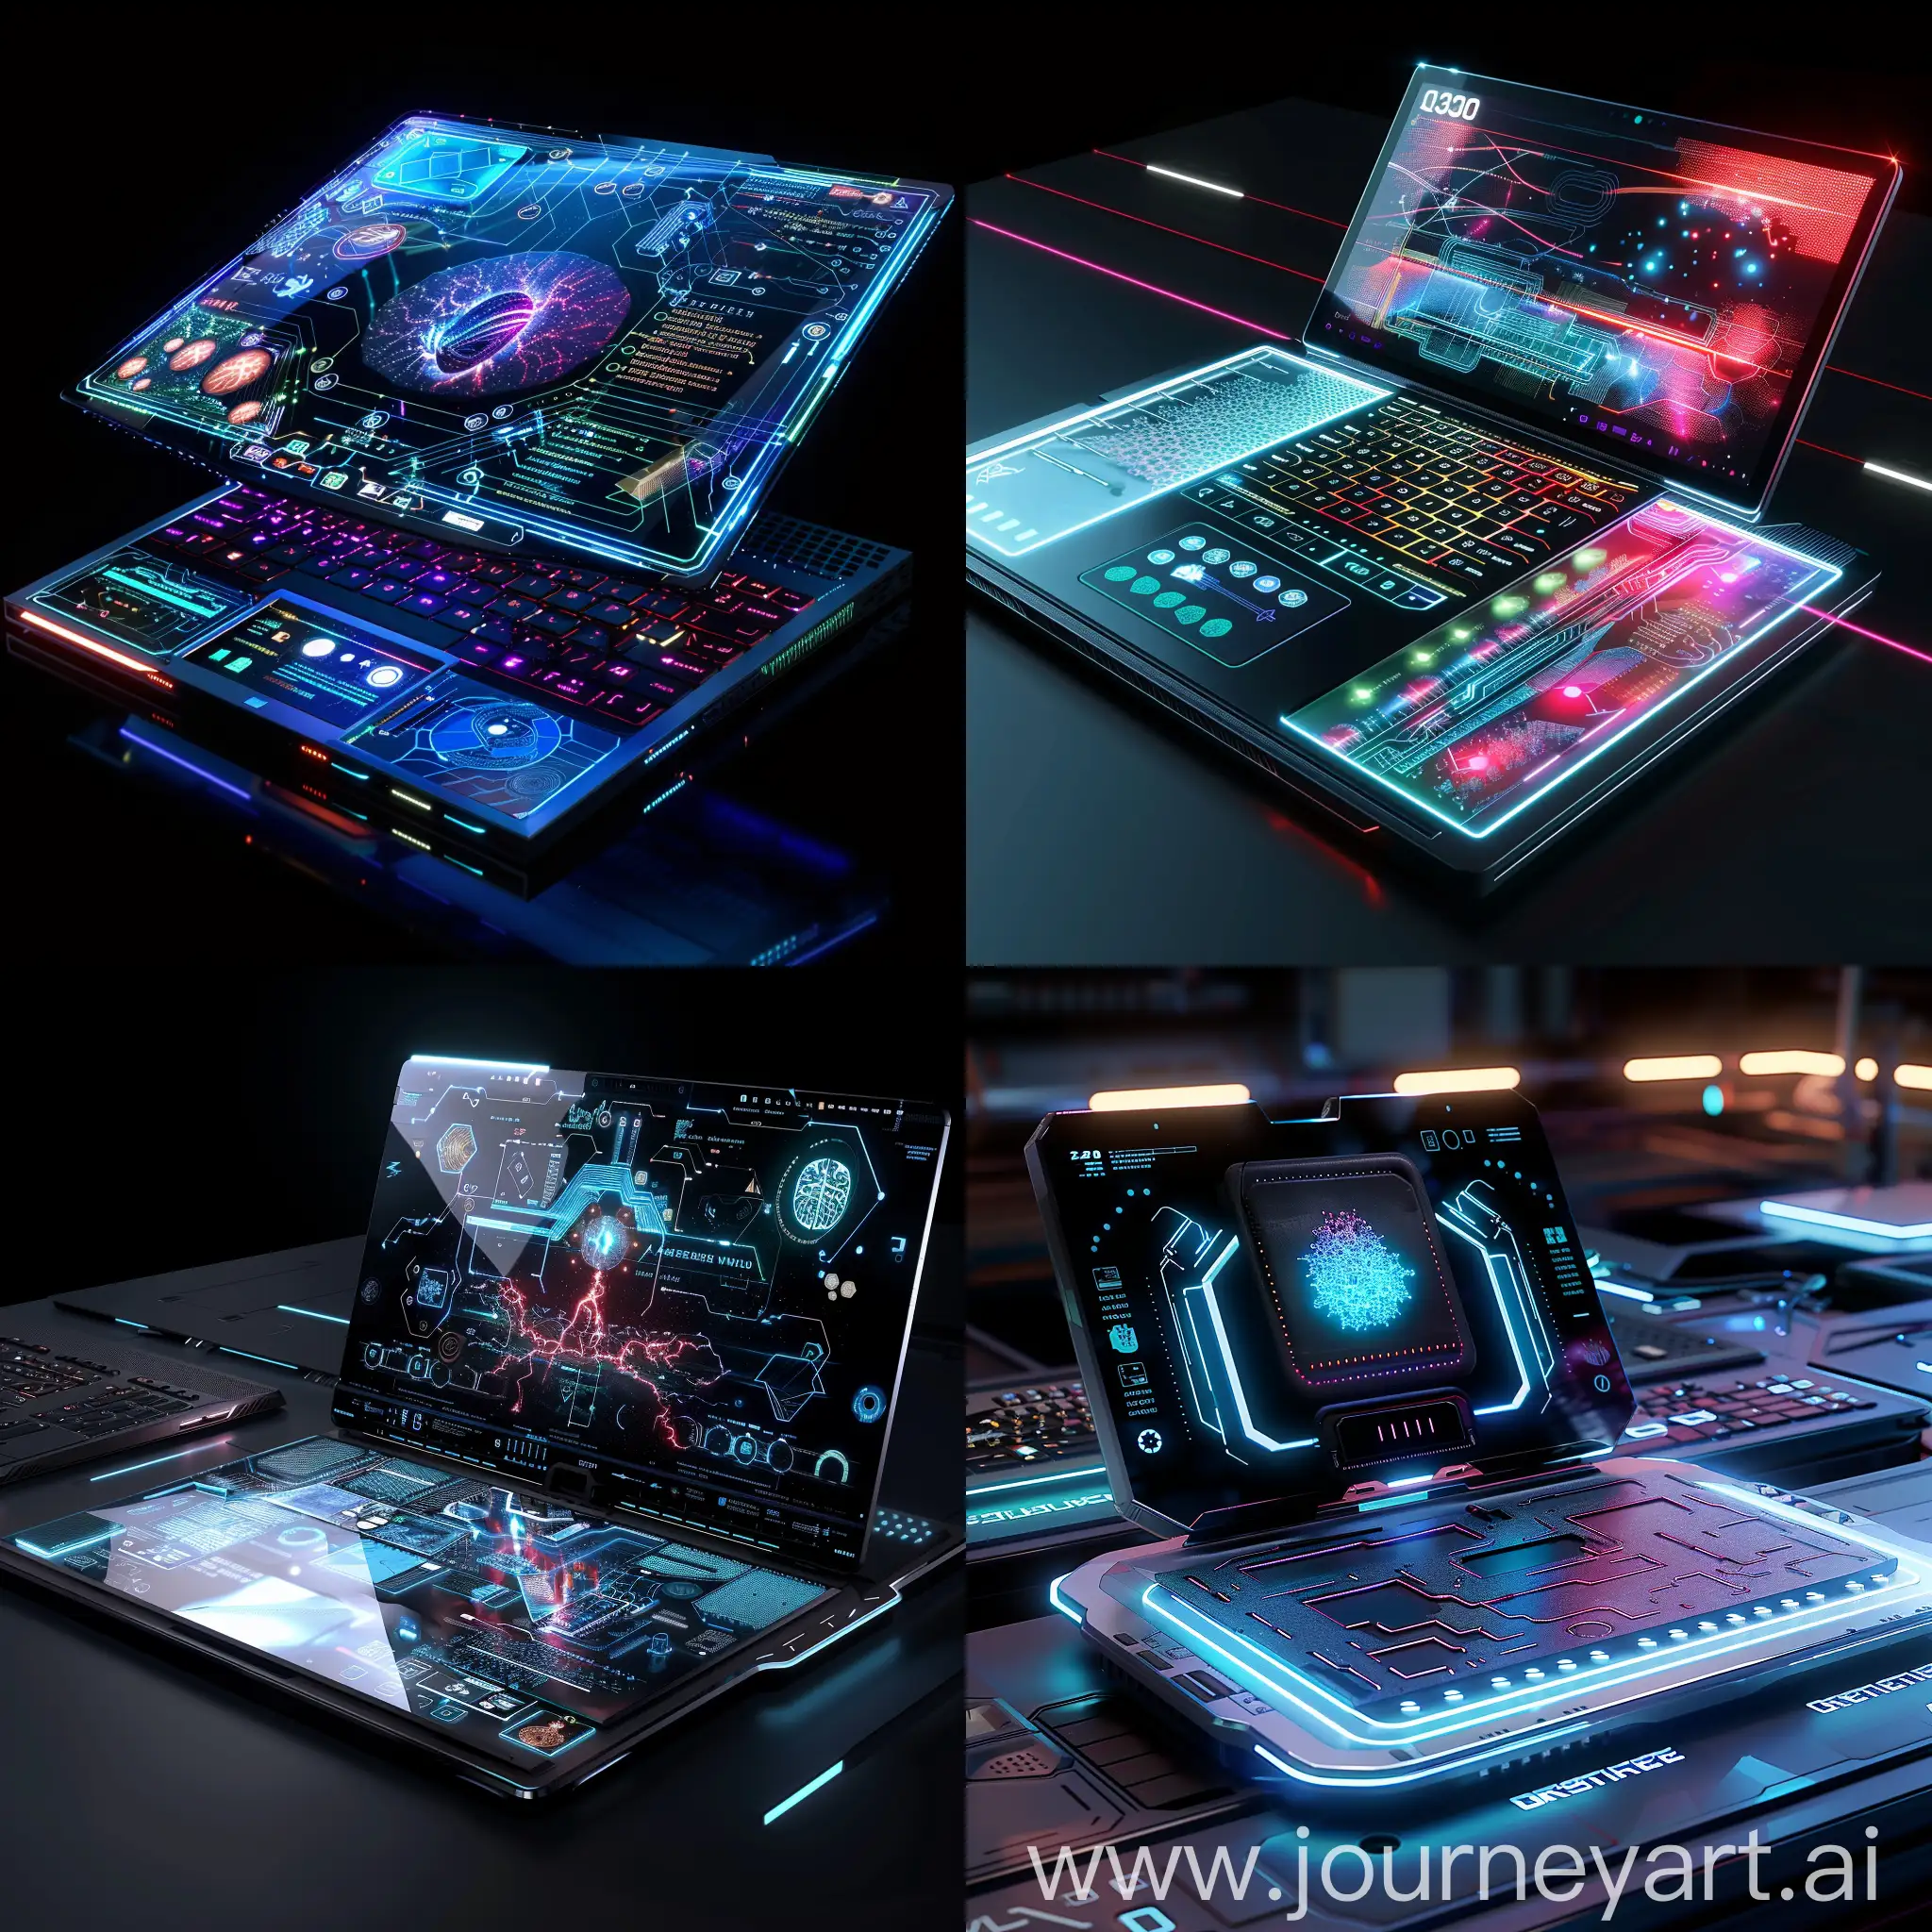 Futuristic-Quantum-Laptop-with-Holographic-Display-and-AI-Integration